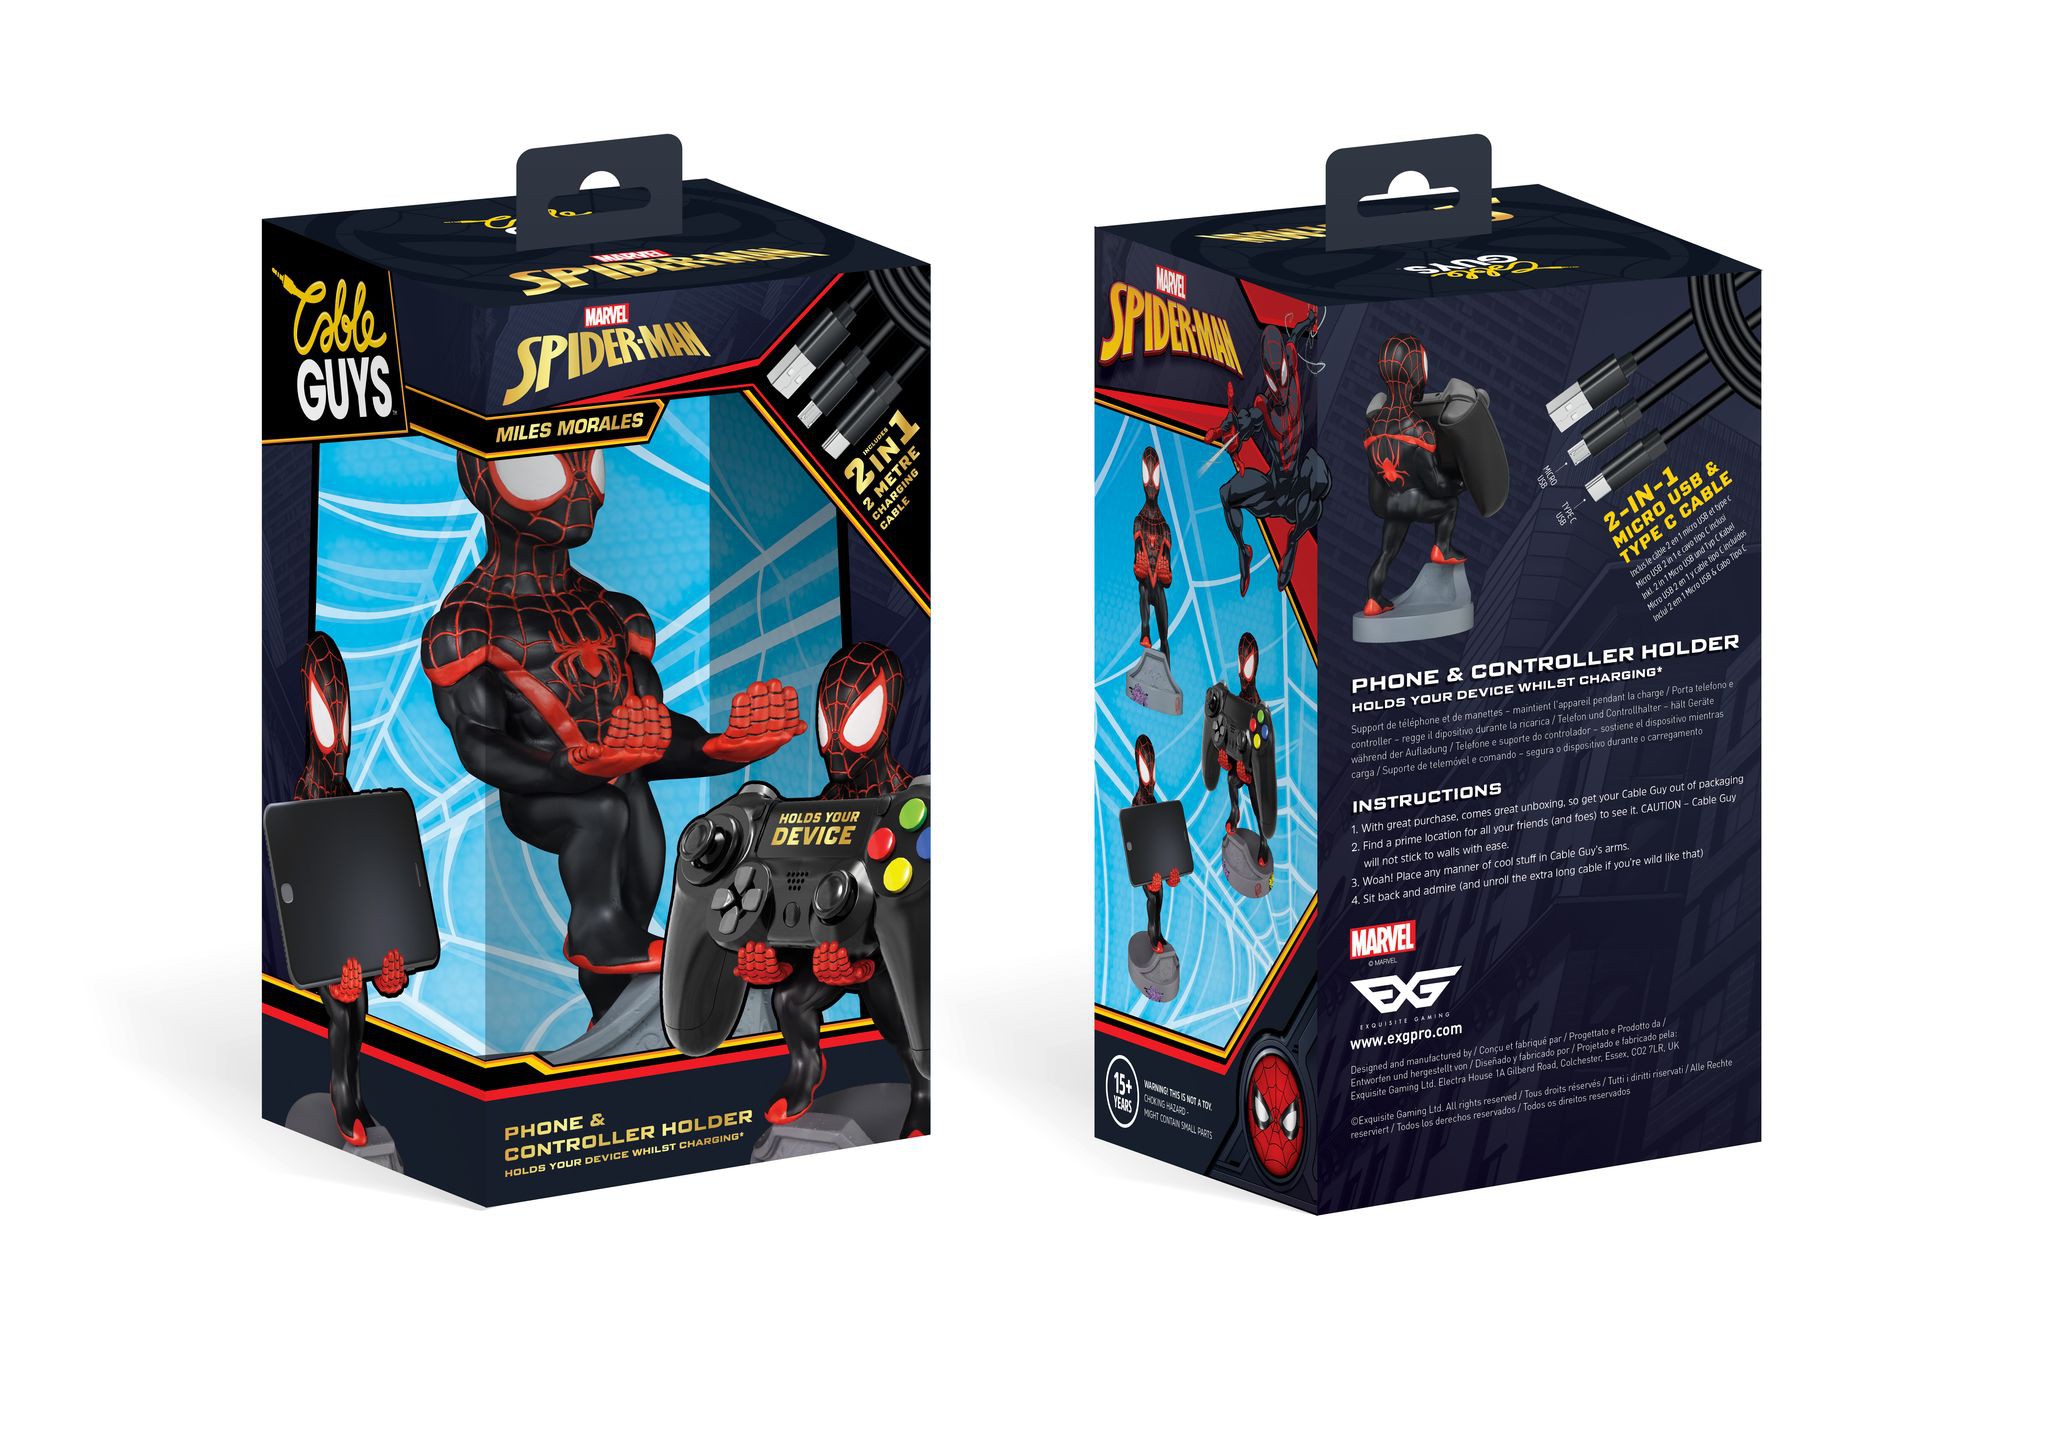 Spider-Man Miles Morales Cable Guy stand